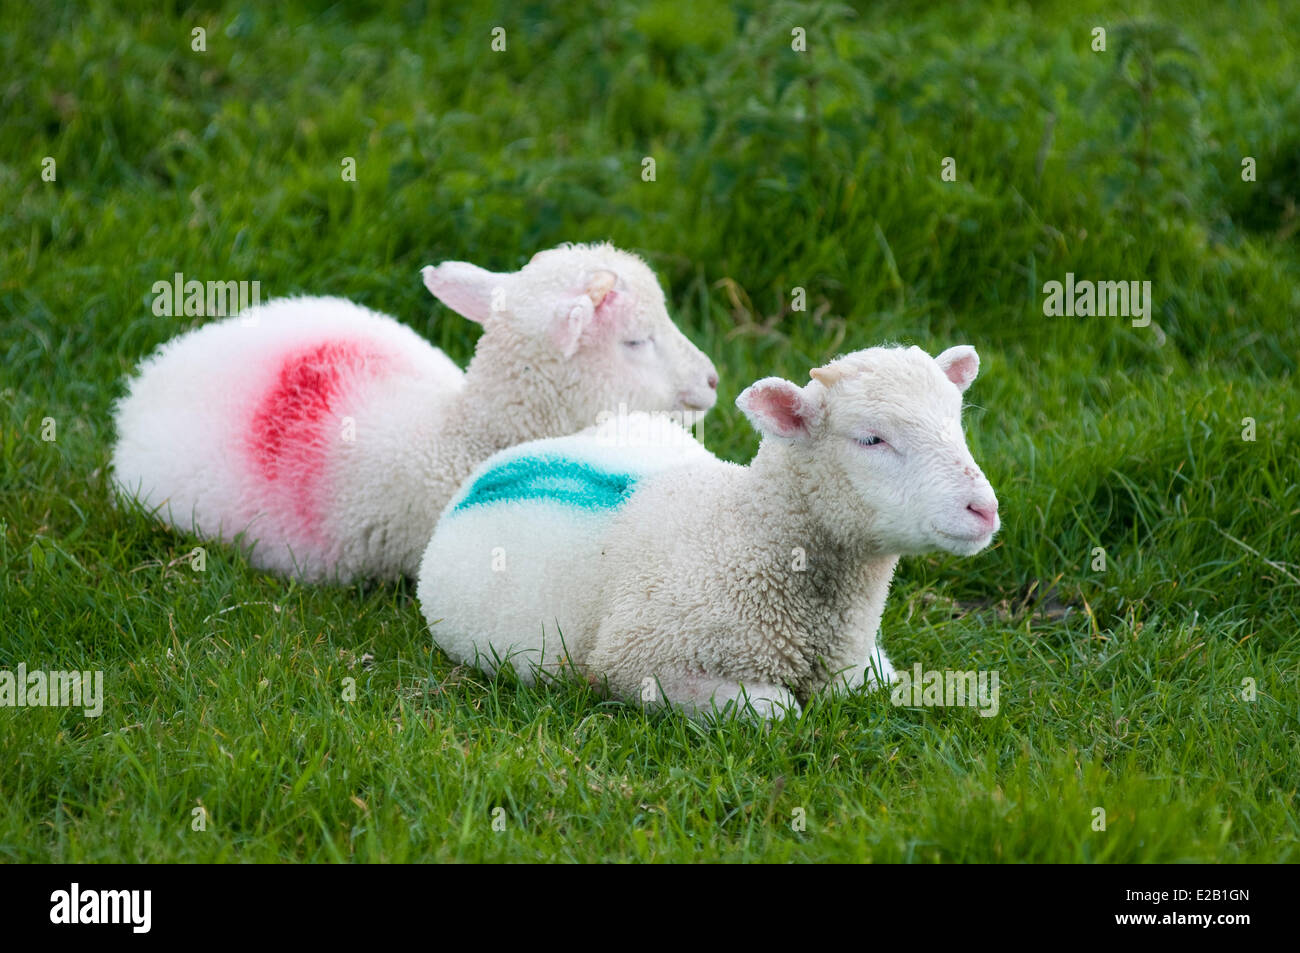 Ireland, County Kerry, Dingle Peninsula, two lambs in the grass Stock Photo